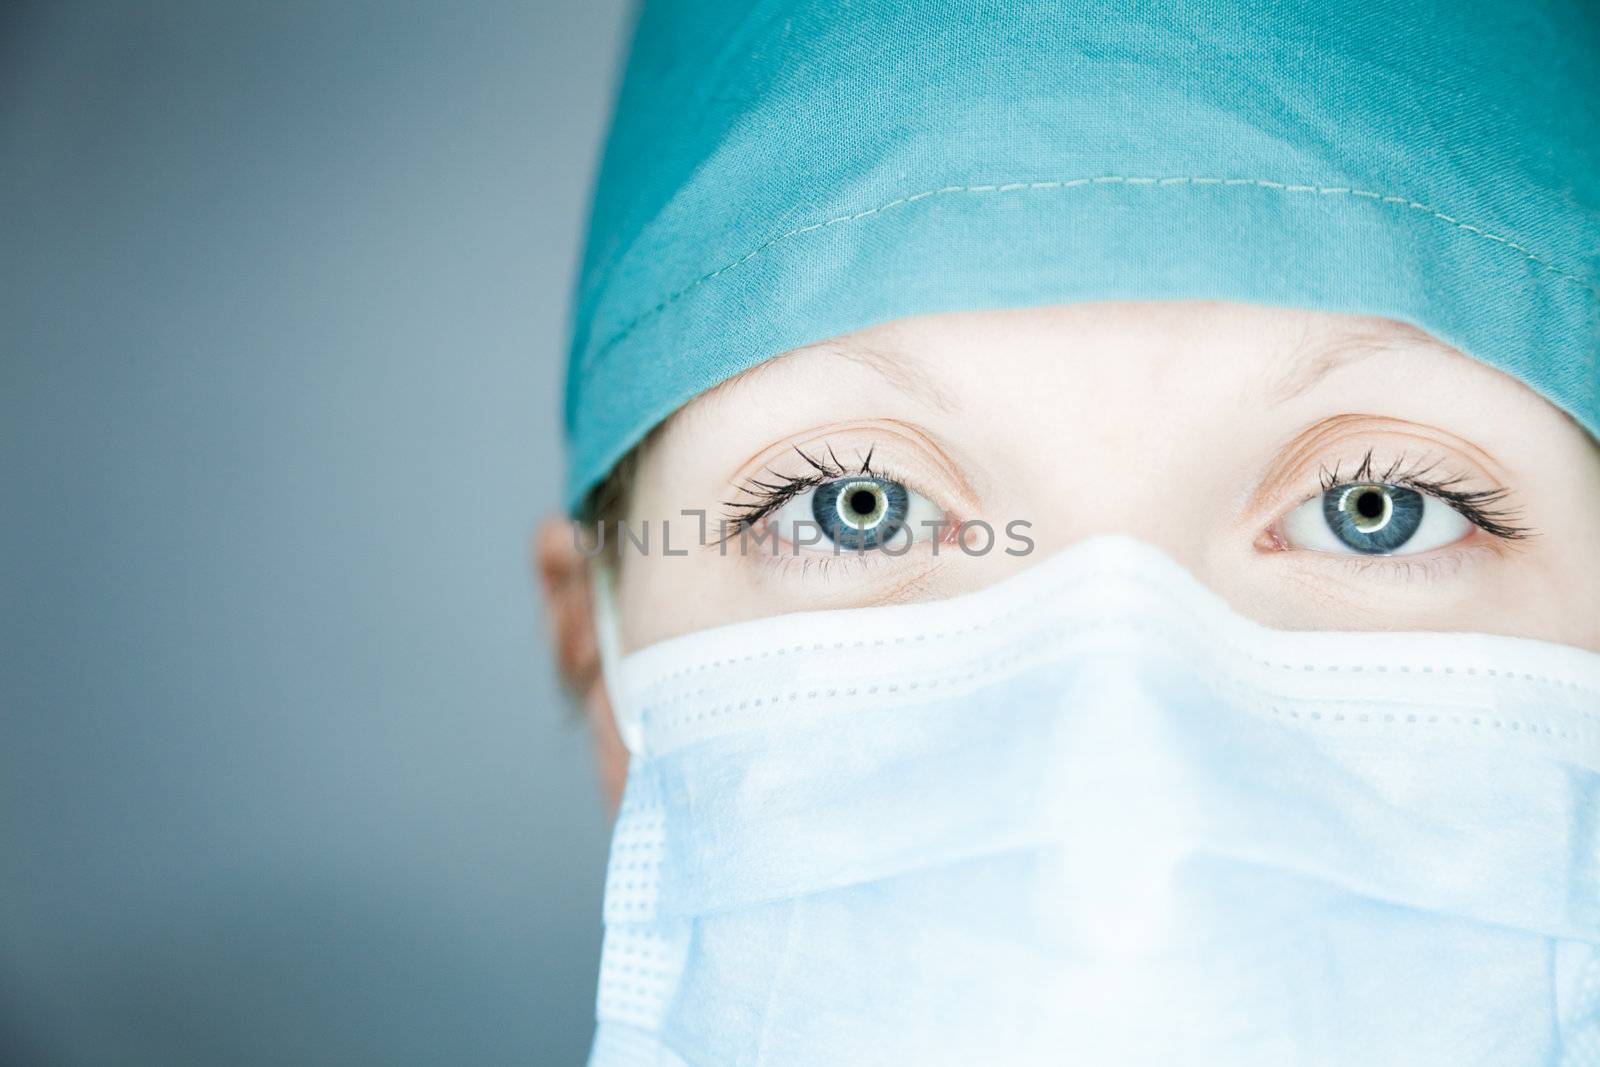 Nurse looking at you (close-up)
 by aetb